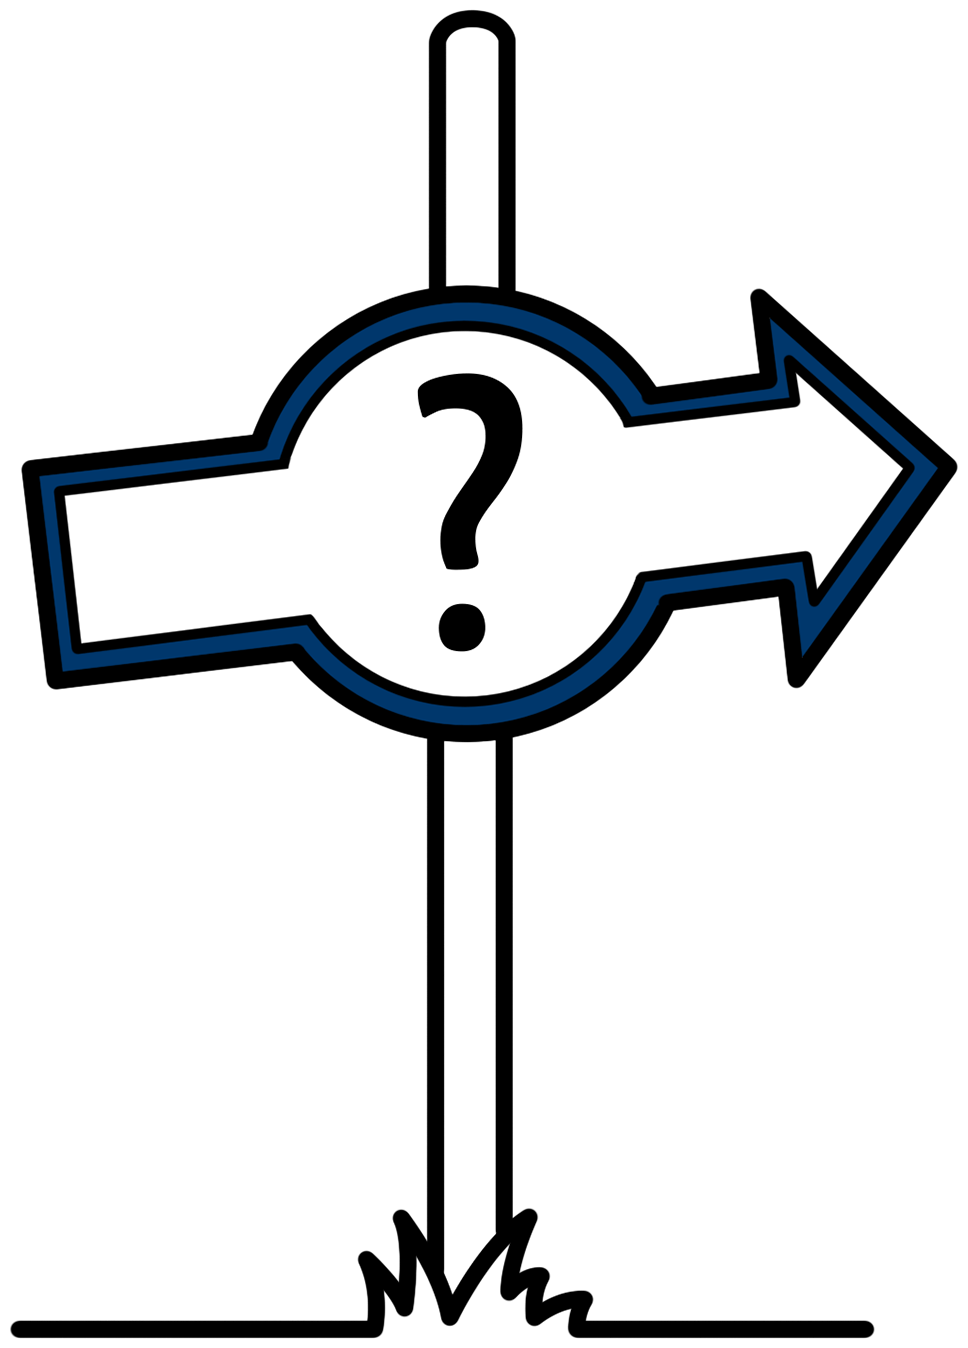 05.1_sign_question_mark.png